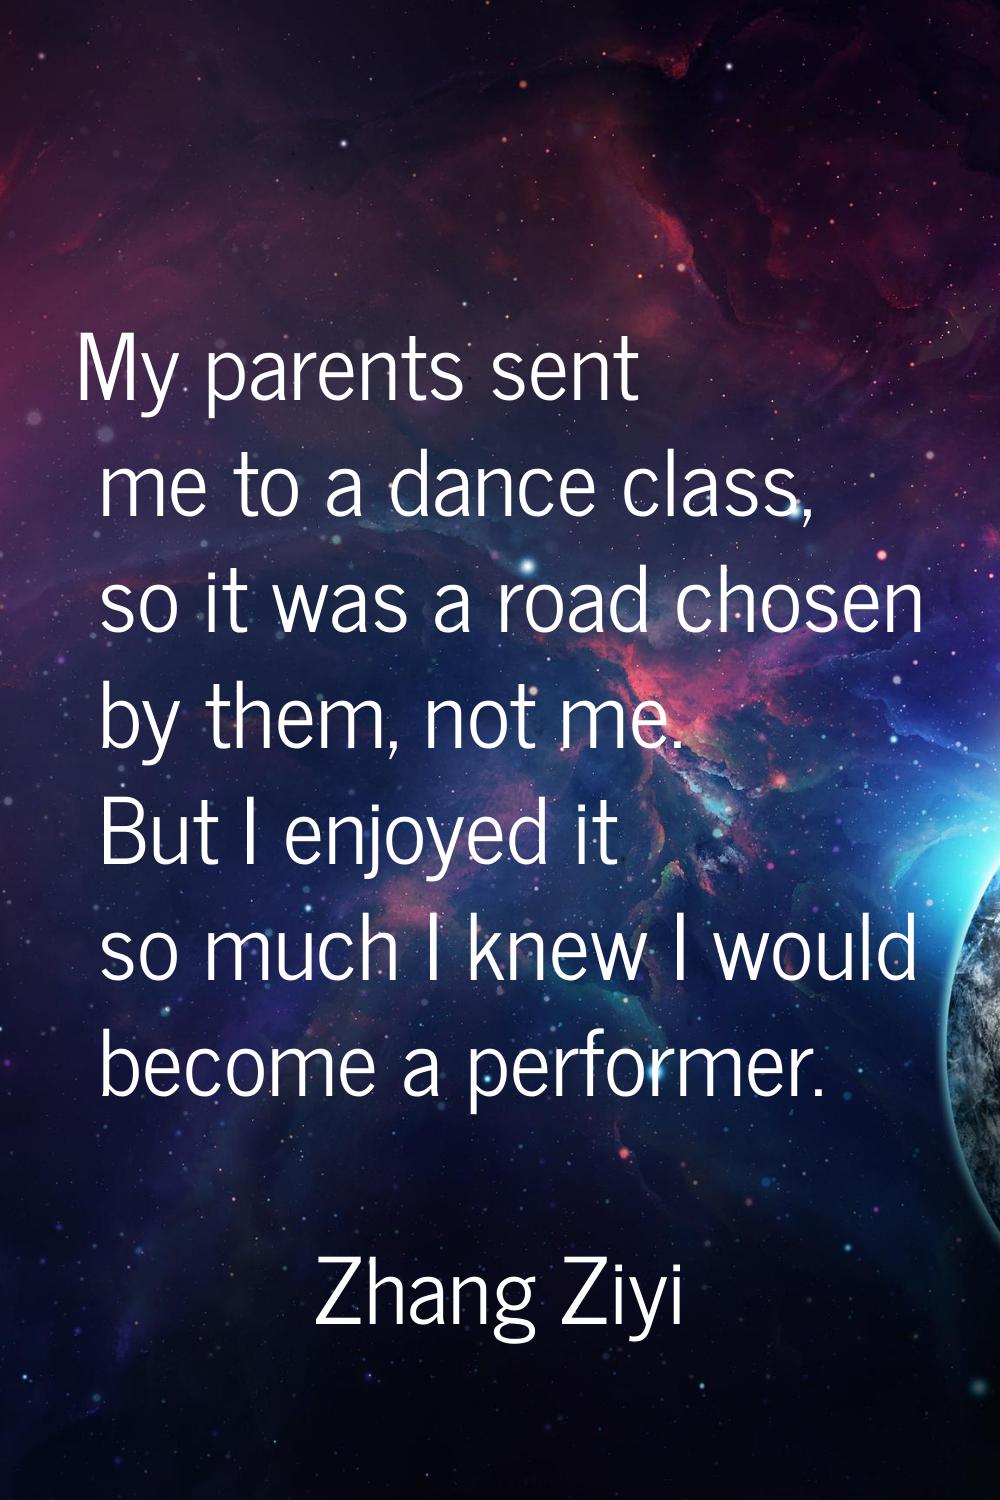 My parents sent me to a dance class, so it was a road chosen by them, not me. But I enjoyed it so m